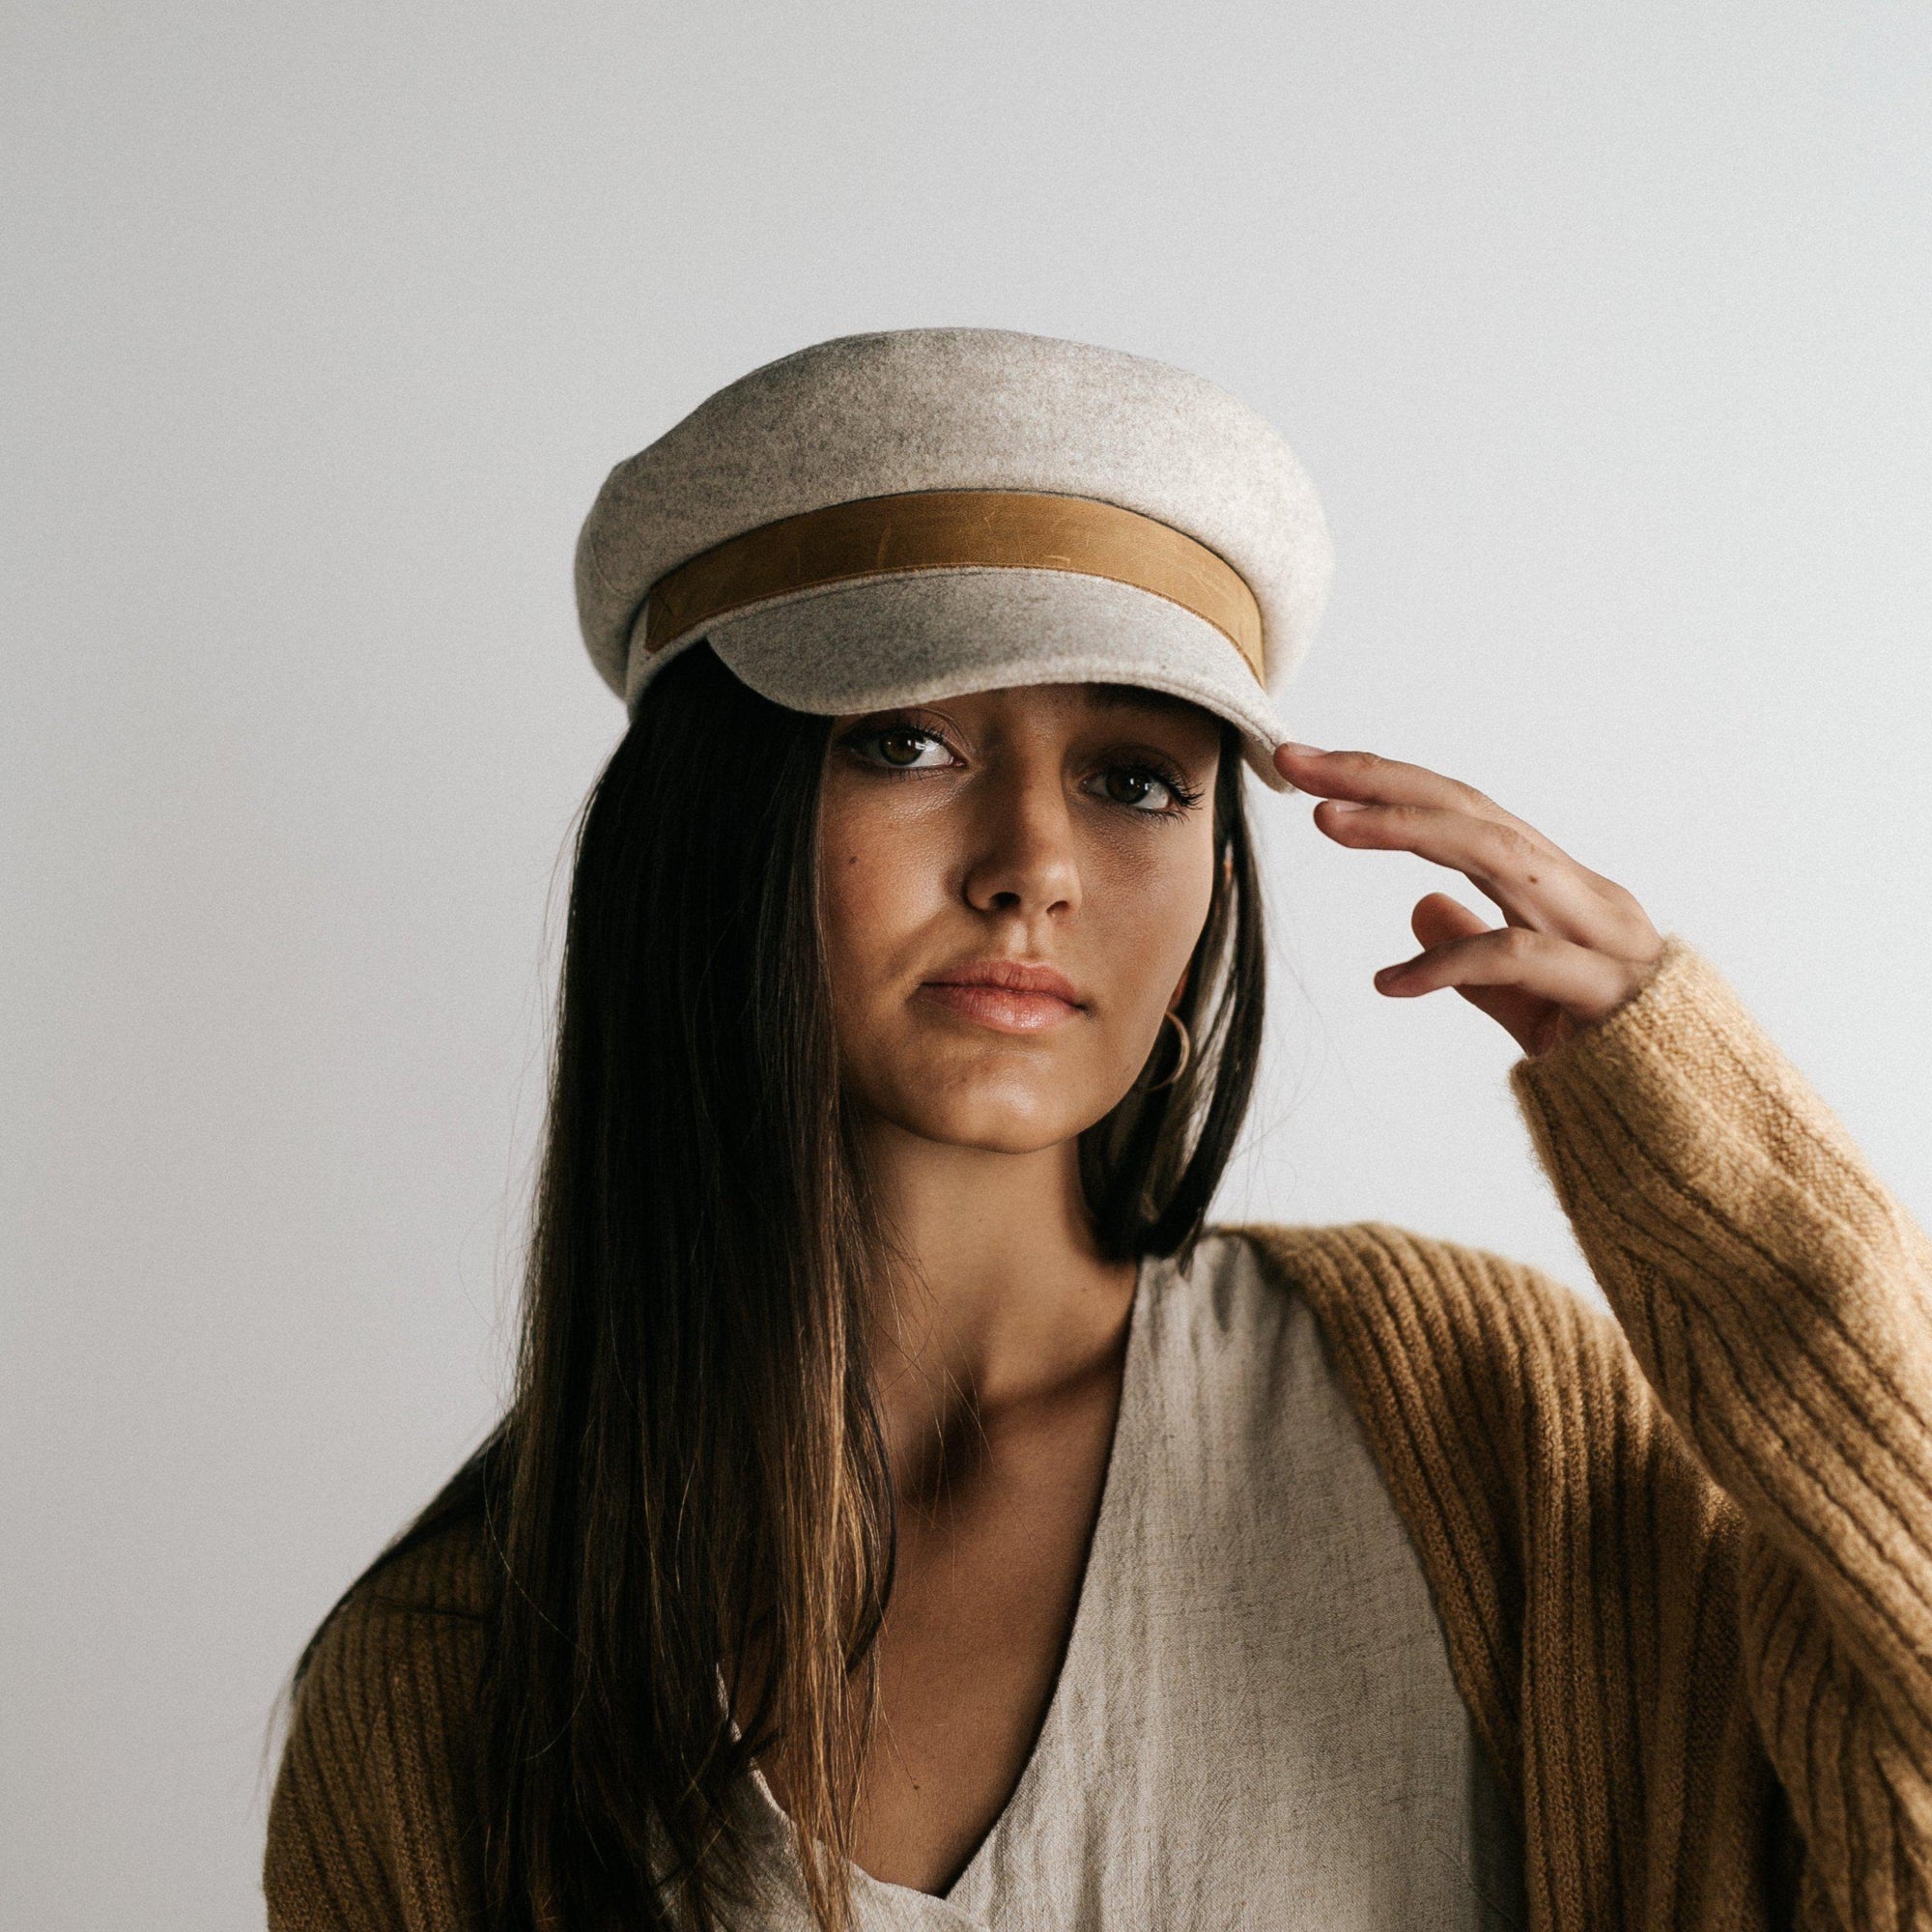 Gigi Pip caps for women - James Felt Cap with Genuine Leather Band - 100% wool cap with polyester lining and an adjustable inner band, with a genuine leather band featuring the Gigi Pip xx stitching above the bill [grid with cognac band]